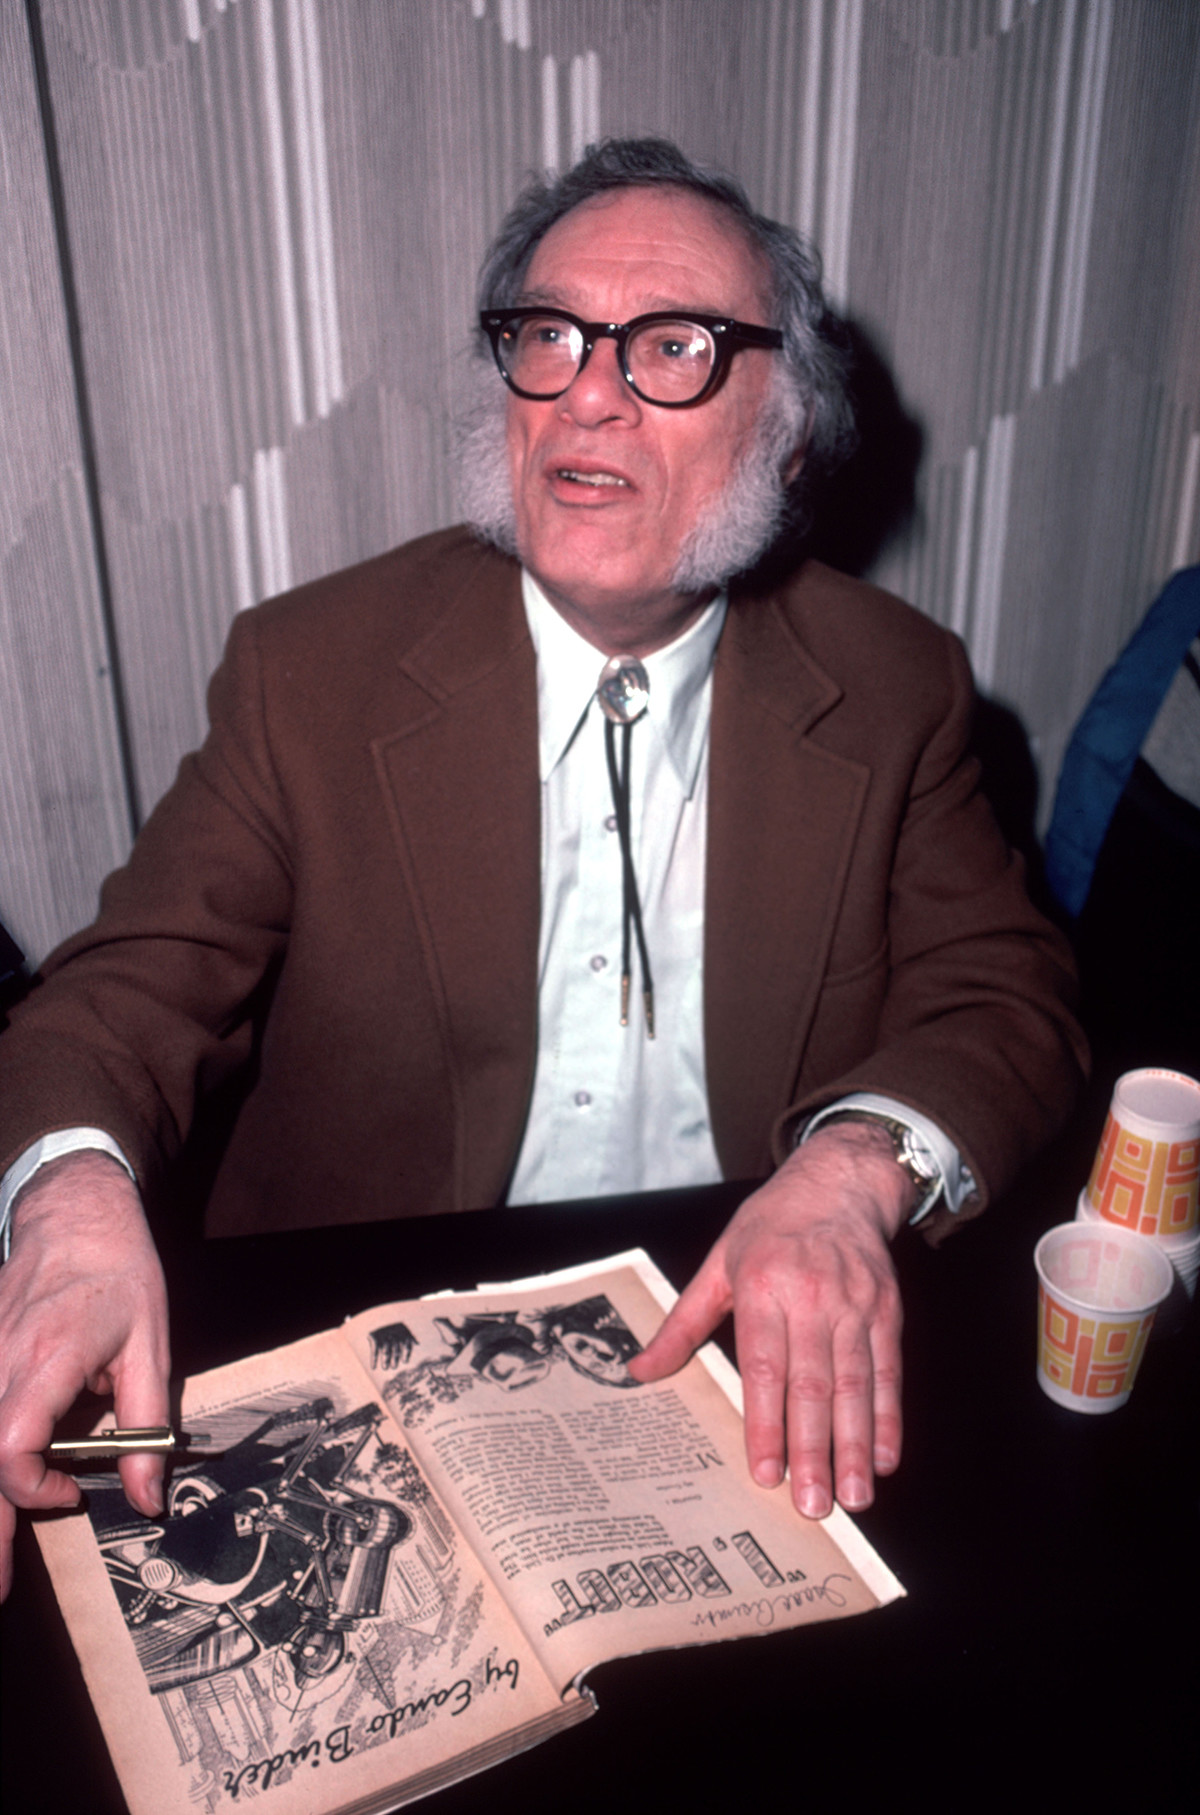 The year 2020 marks the 100th anniversary of the birth of Isaac Asimov.